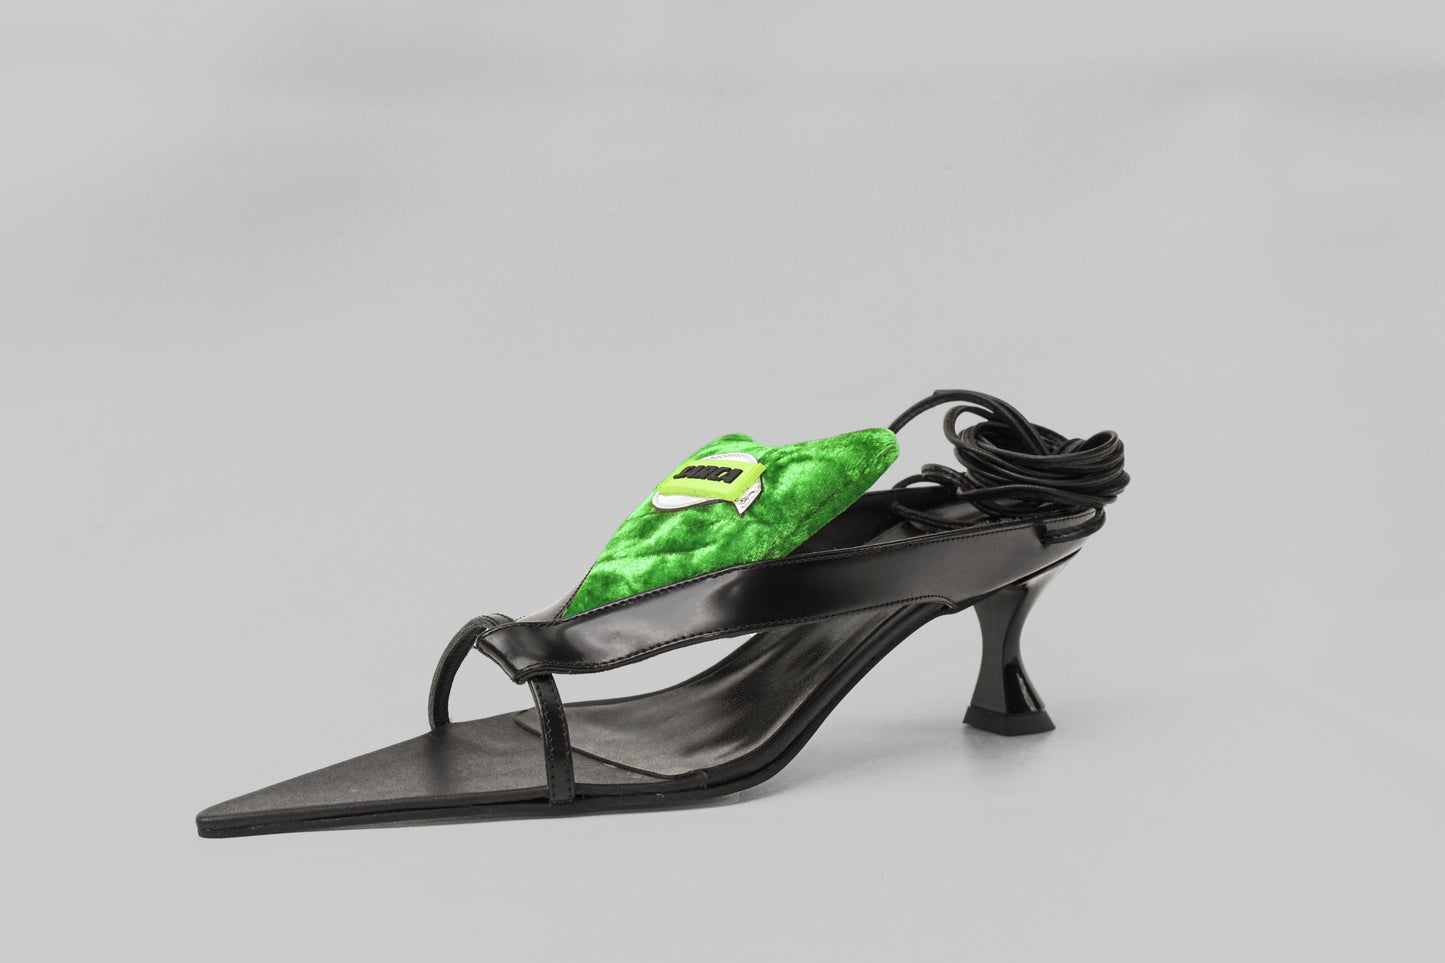 A photograph of diagonal view of Ancuta Sarca Tallulah Sandal shoe in BLACK AND GREEN, SELF-TIE ANKLE STRAP FASTENING, PADDED LOGO PATCH ON TONGUE, MADE IN ITALY